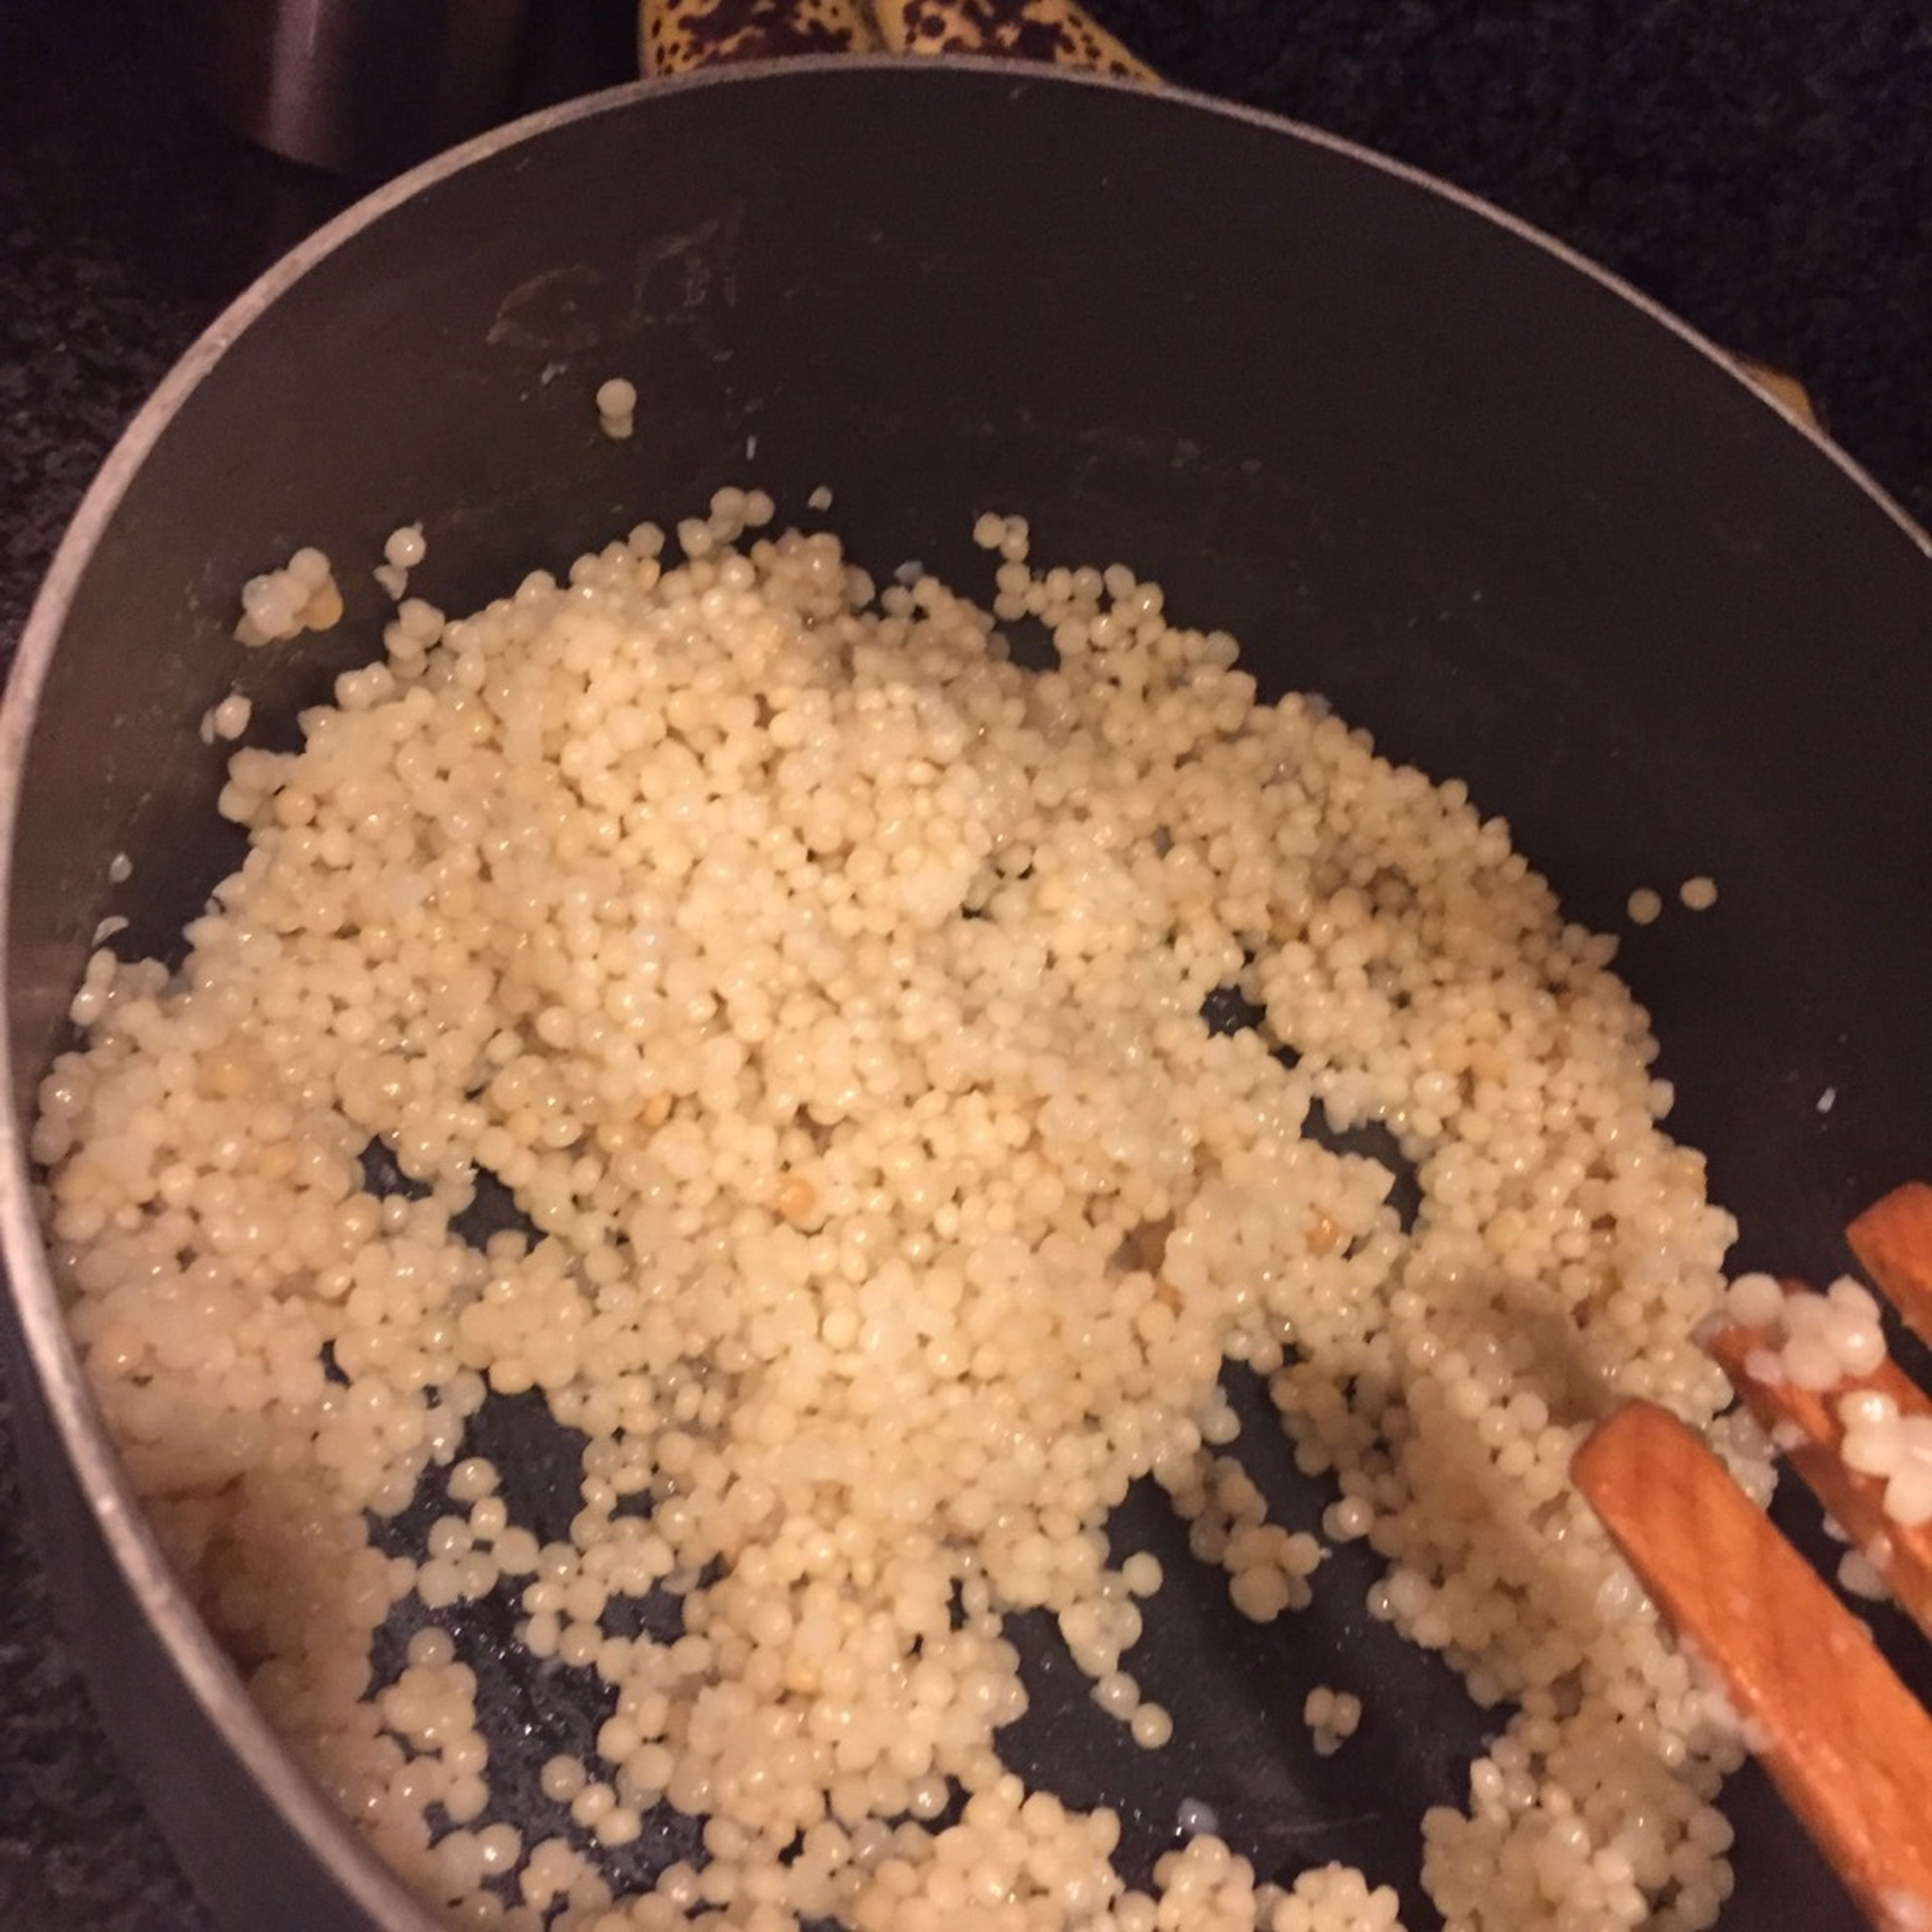 Meanwhile, bring water to a boil and add couscous. Stir well, remove from heat, and cover the saucepan. Let sit for approx. 5 min. while covered. Remove lid and fluff with fork. (It is important to remove lid so that couscous does not become gummy.)